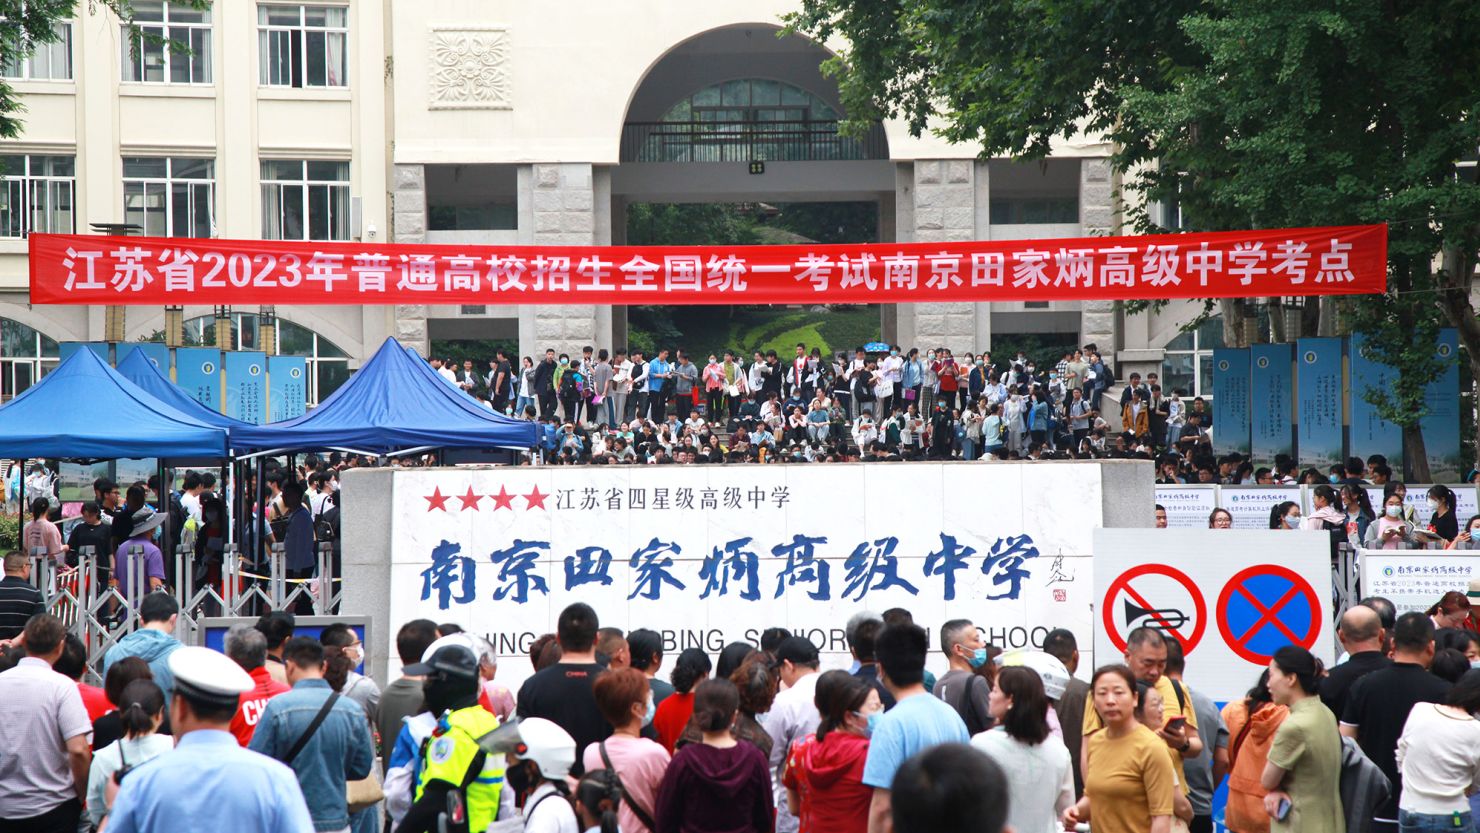 Candidates wait to enter a college entrance exam site in Nanjing, China, on June 7, 2023.